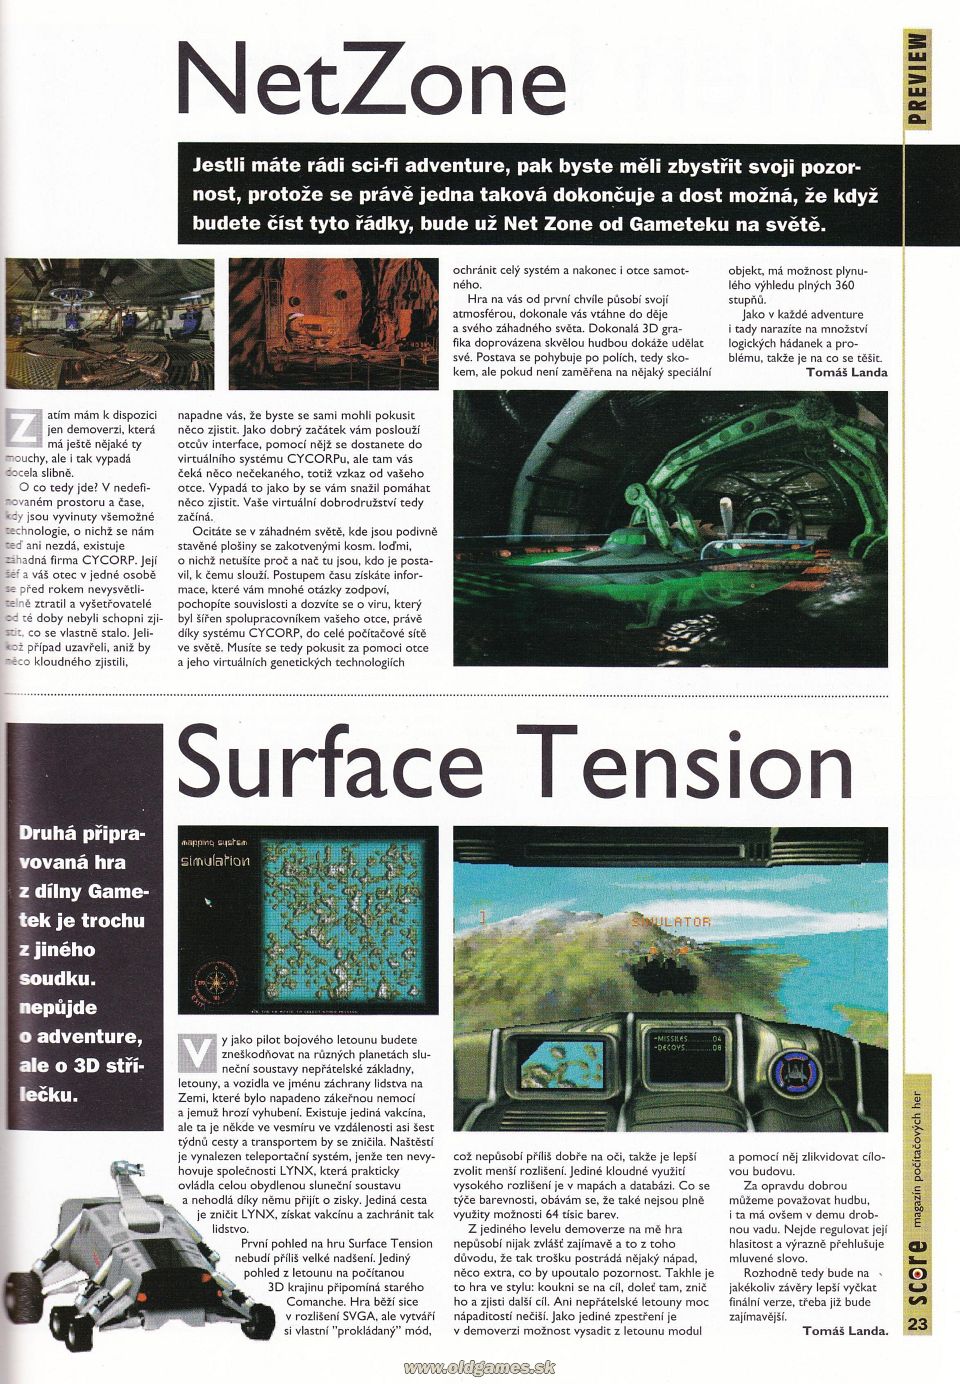 Preview: NetZone, Surface Tension